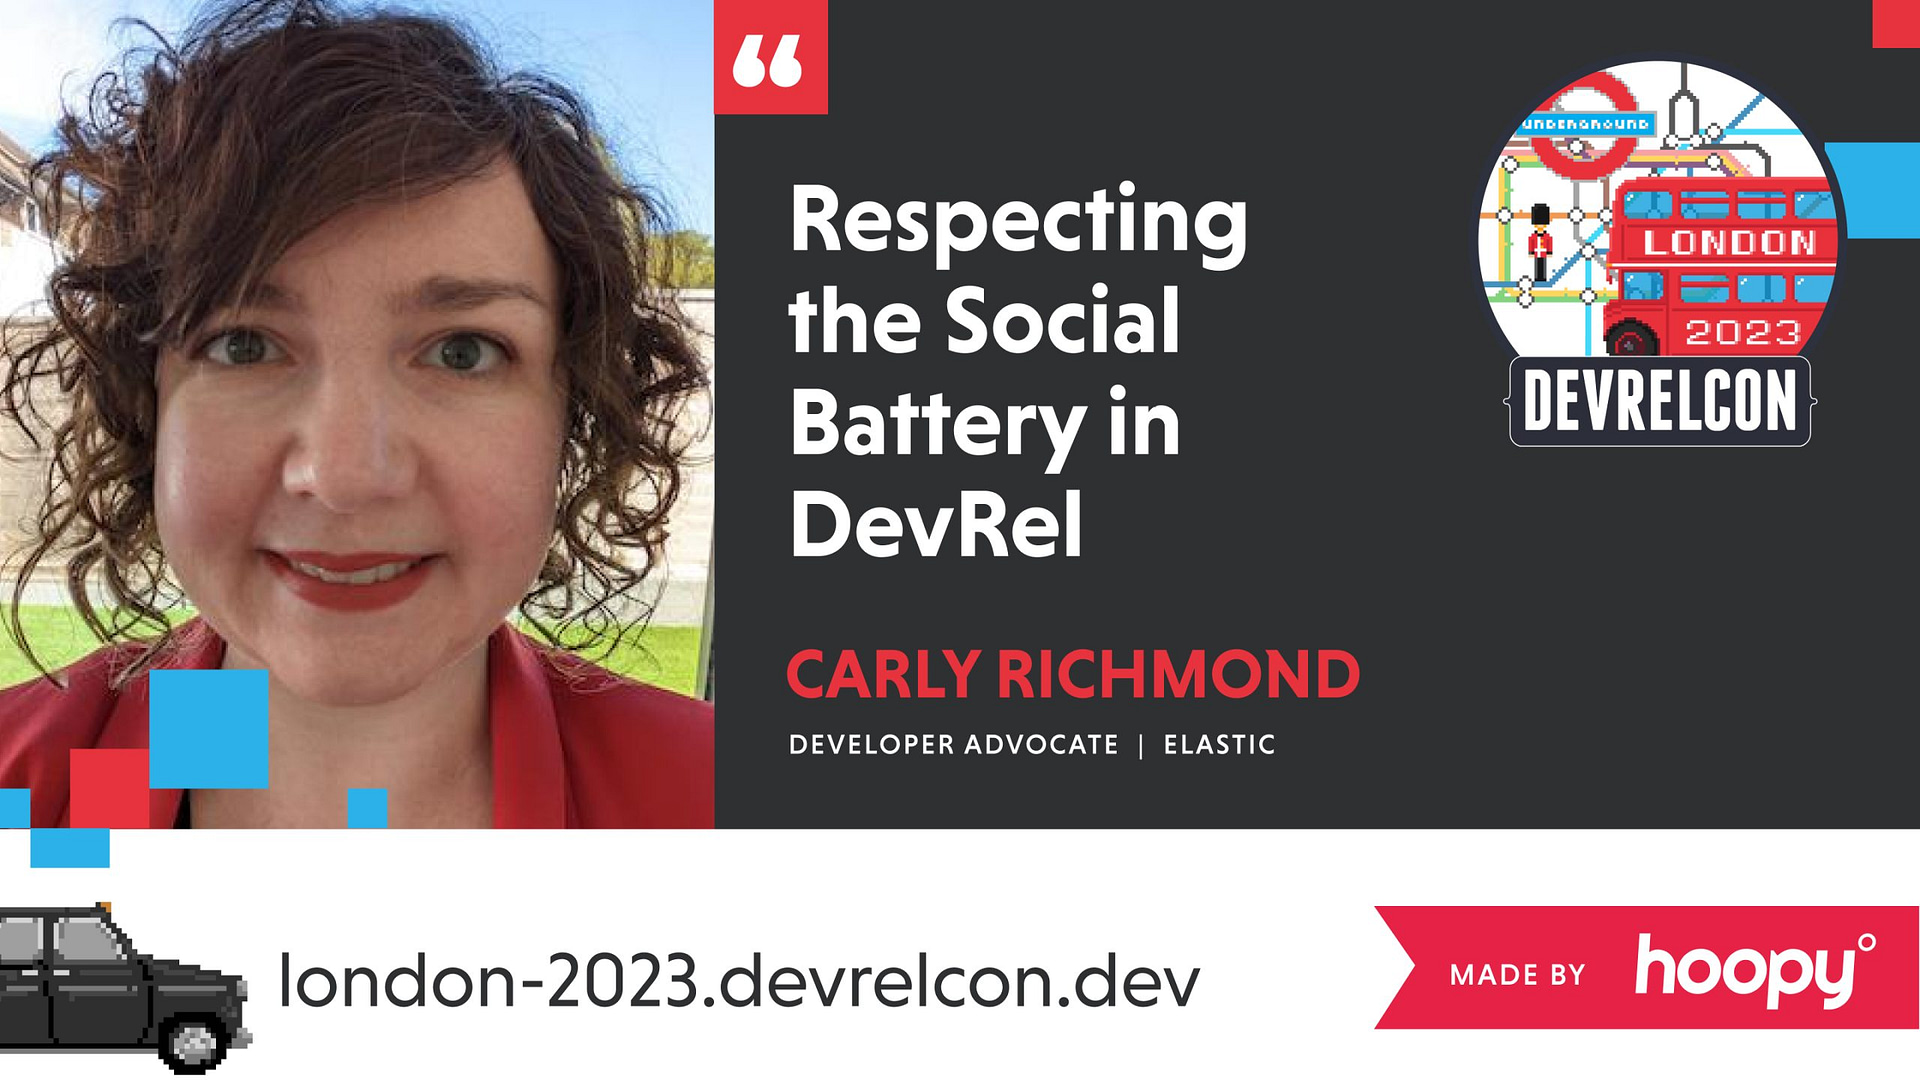 Promotional graphic for DevRelCon London 2023 featuring Carly Richmond, a Developer Advocate at Elastic. The image includes a headshot of Carly Richmond on the left, with the title 'Respecting the Social Battery in DevRel' next to her image. In the background, there are stylized elements representing London, such as the Underground sign and a red double-decker bus. The event's website, 'london-2023.devrelcon.dev,' is displayed at the bottom. The logo of 'hoopy,' the creator of the graphic, is in the bottom right corner.